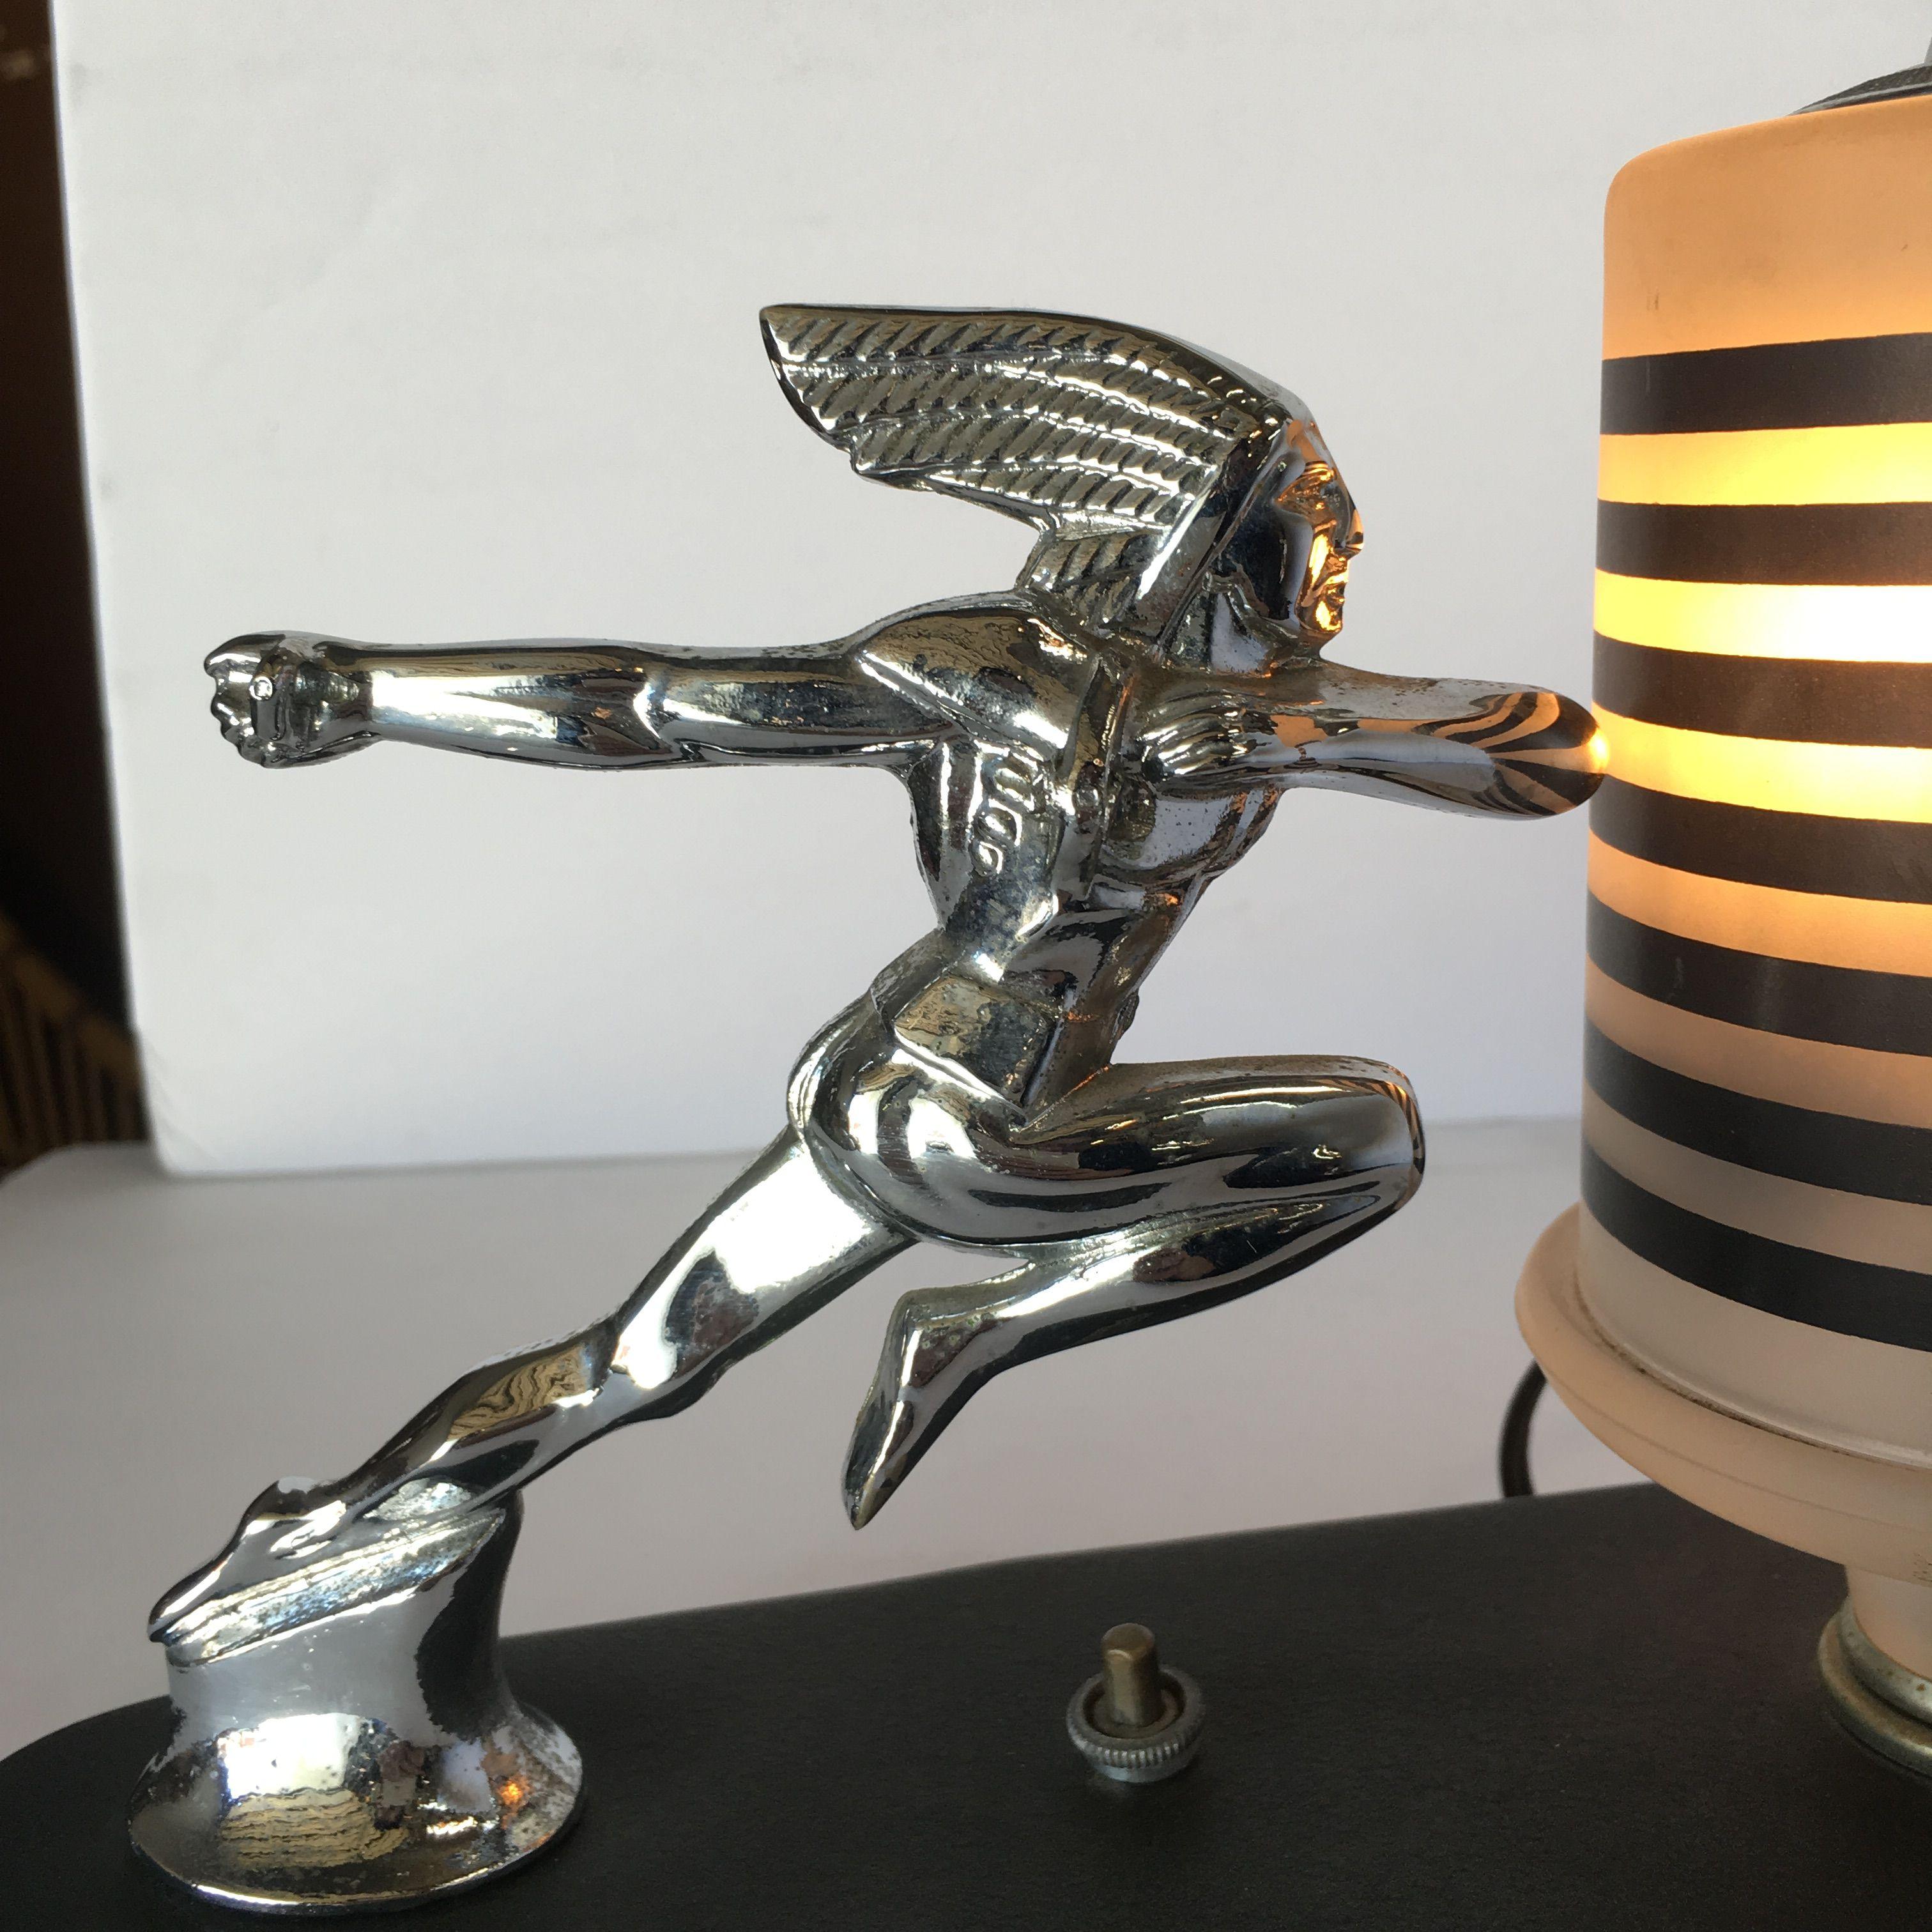 Art Deco Style Lamp based on the Pontiac Running Red Indian hood ornament from 1936. In is fixed to a black marble base with a frosted glass bell shaped lamp. Circa 1980.